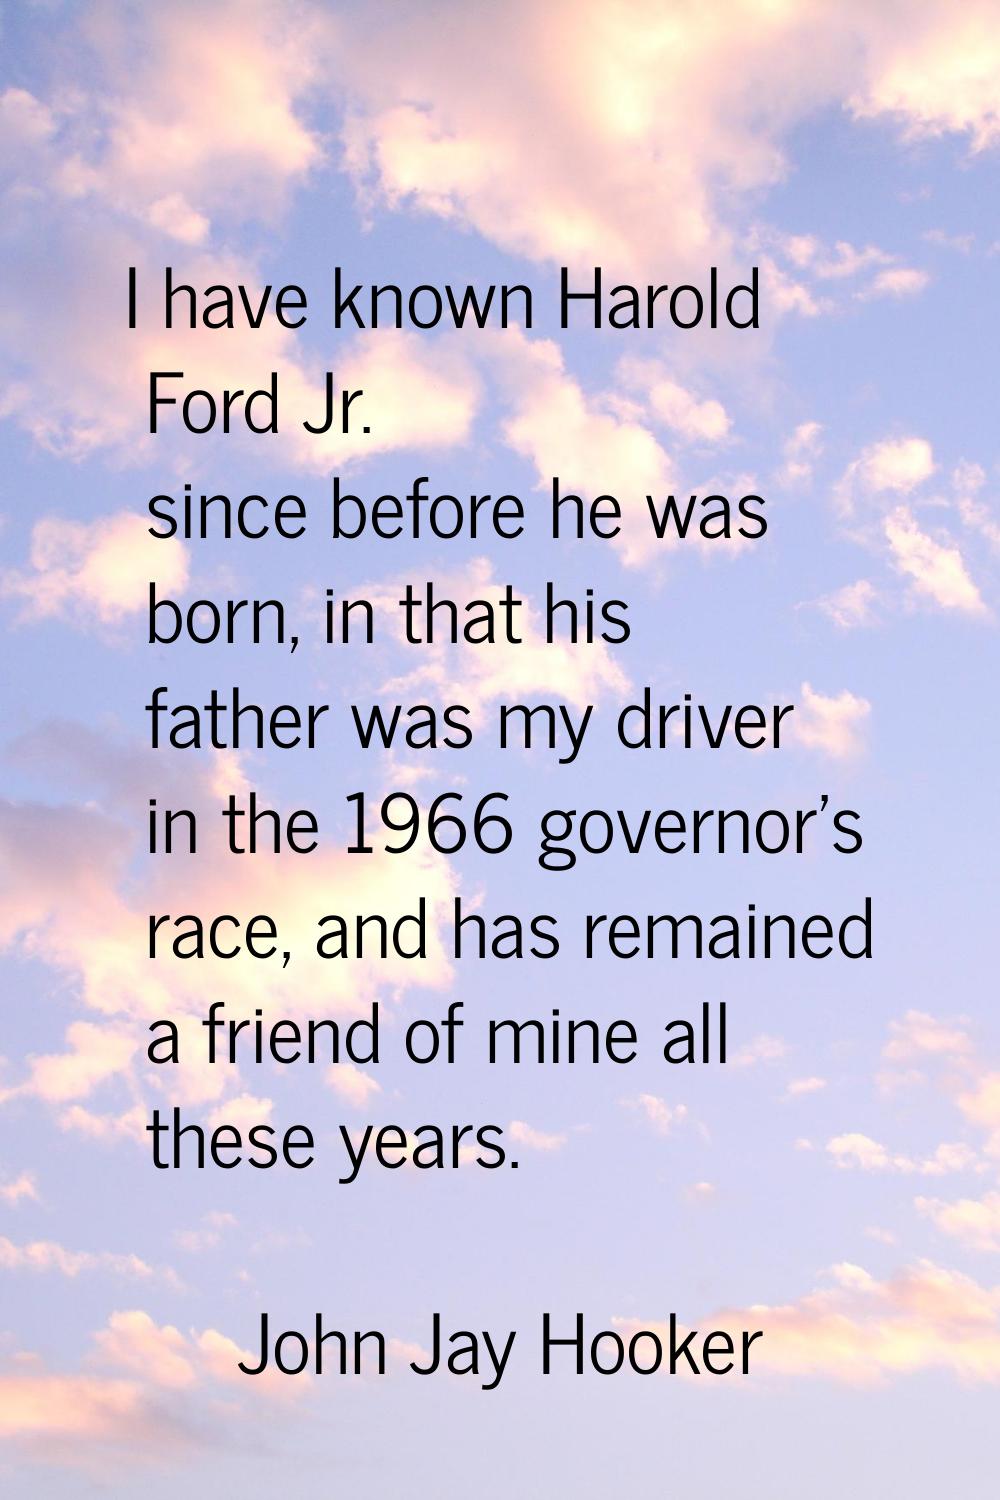 I have known Harold Ford Jr. since before he was born, in that his father was my driver in the 1966